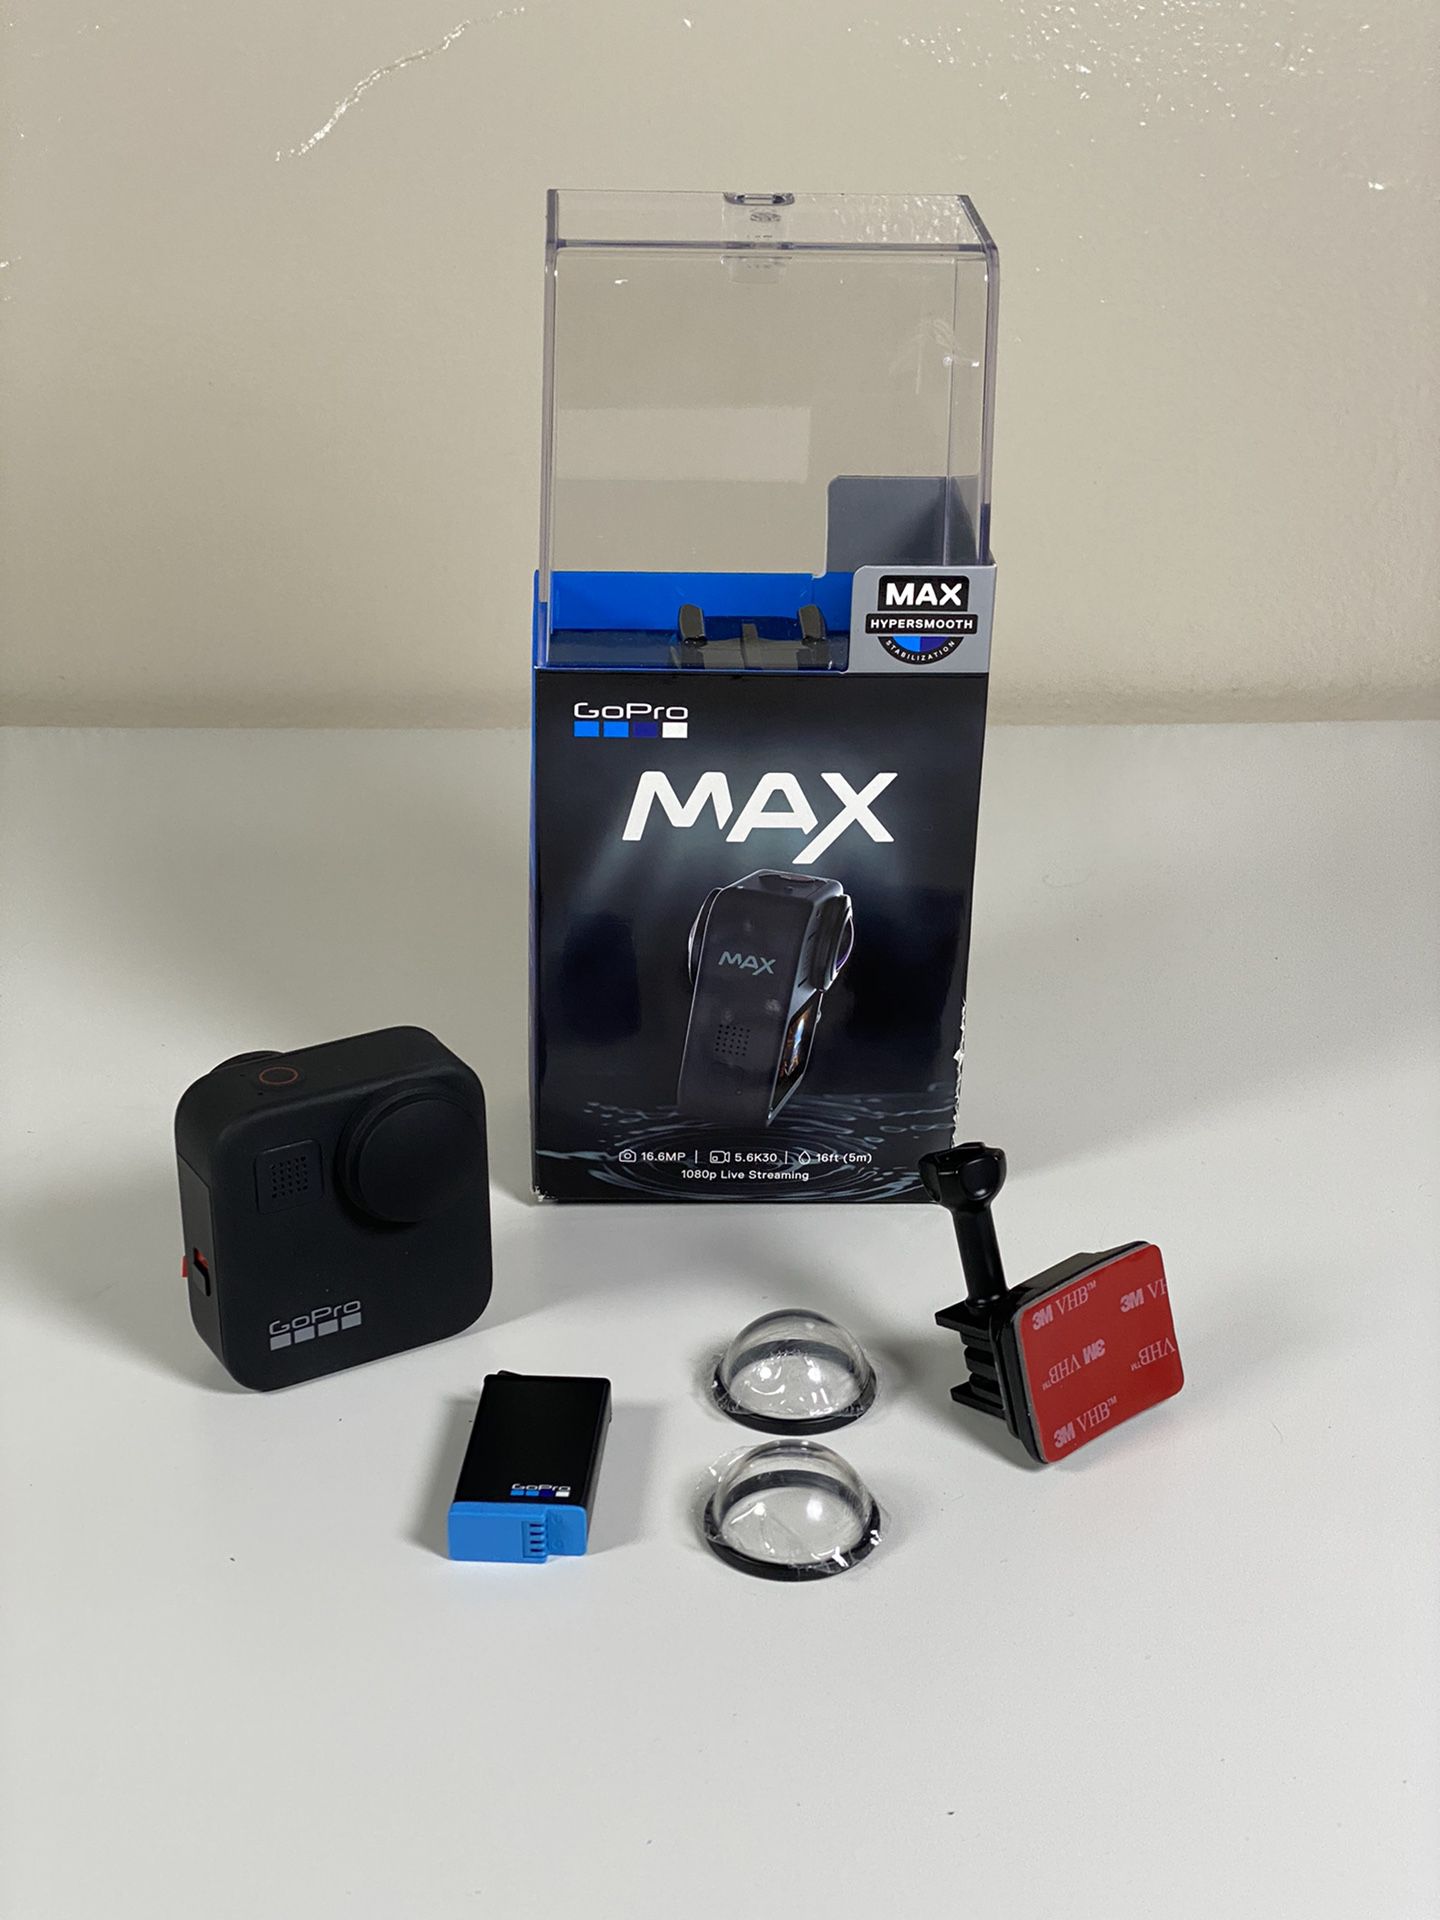 GoPro Max with accessories